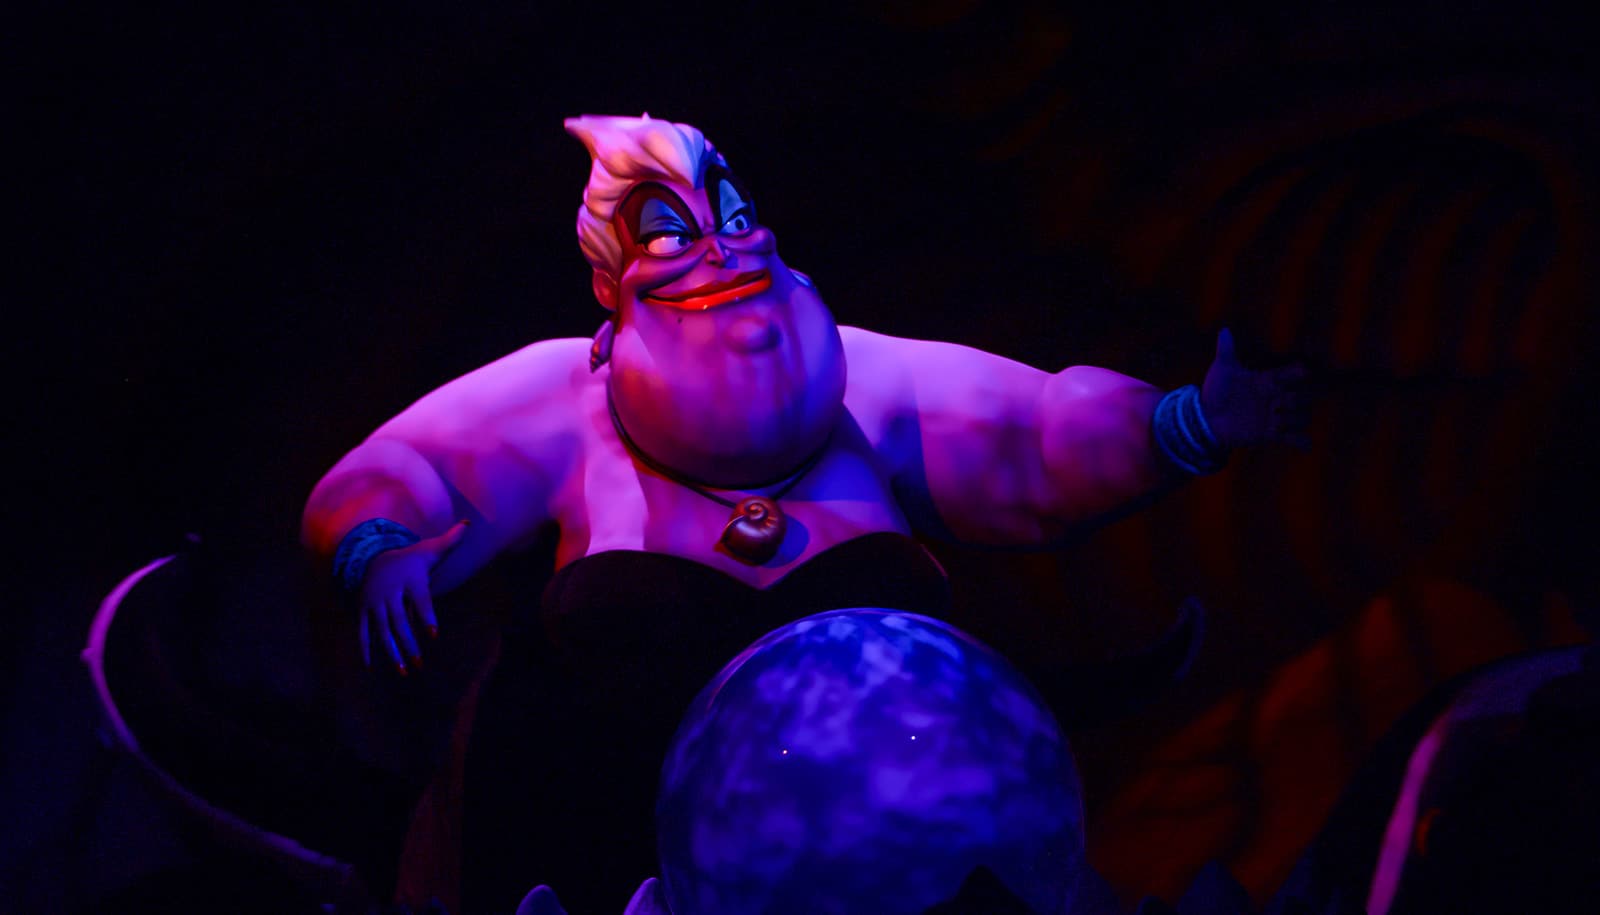 ursula the blue sea witch villain from The Little Mermaid